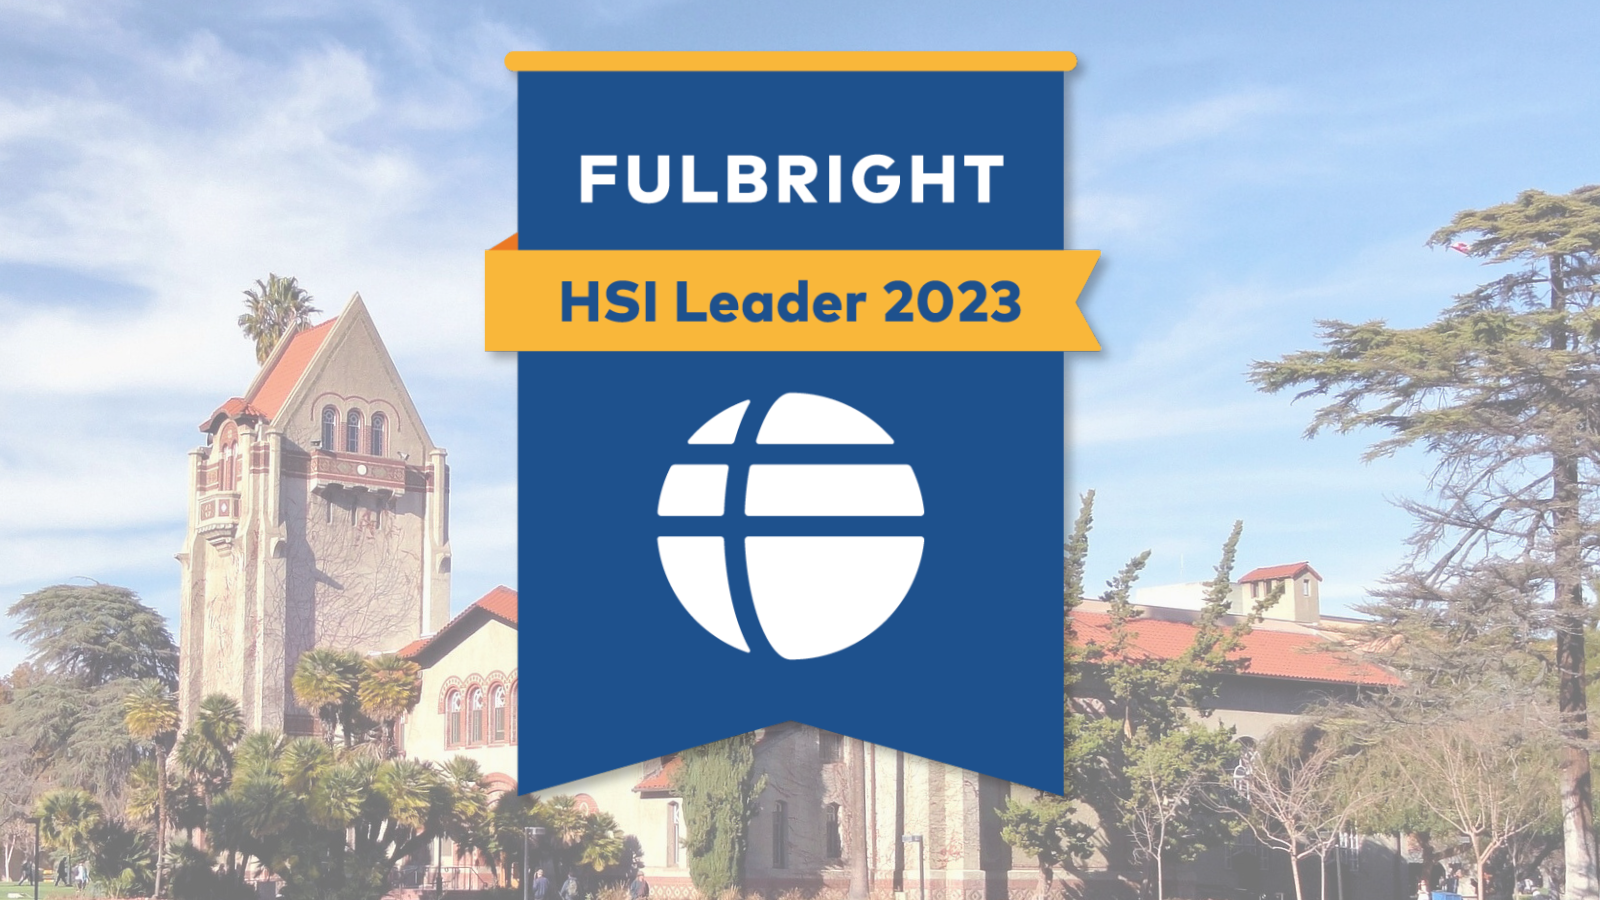 2023 Fulbright HSI Leaders Announced